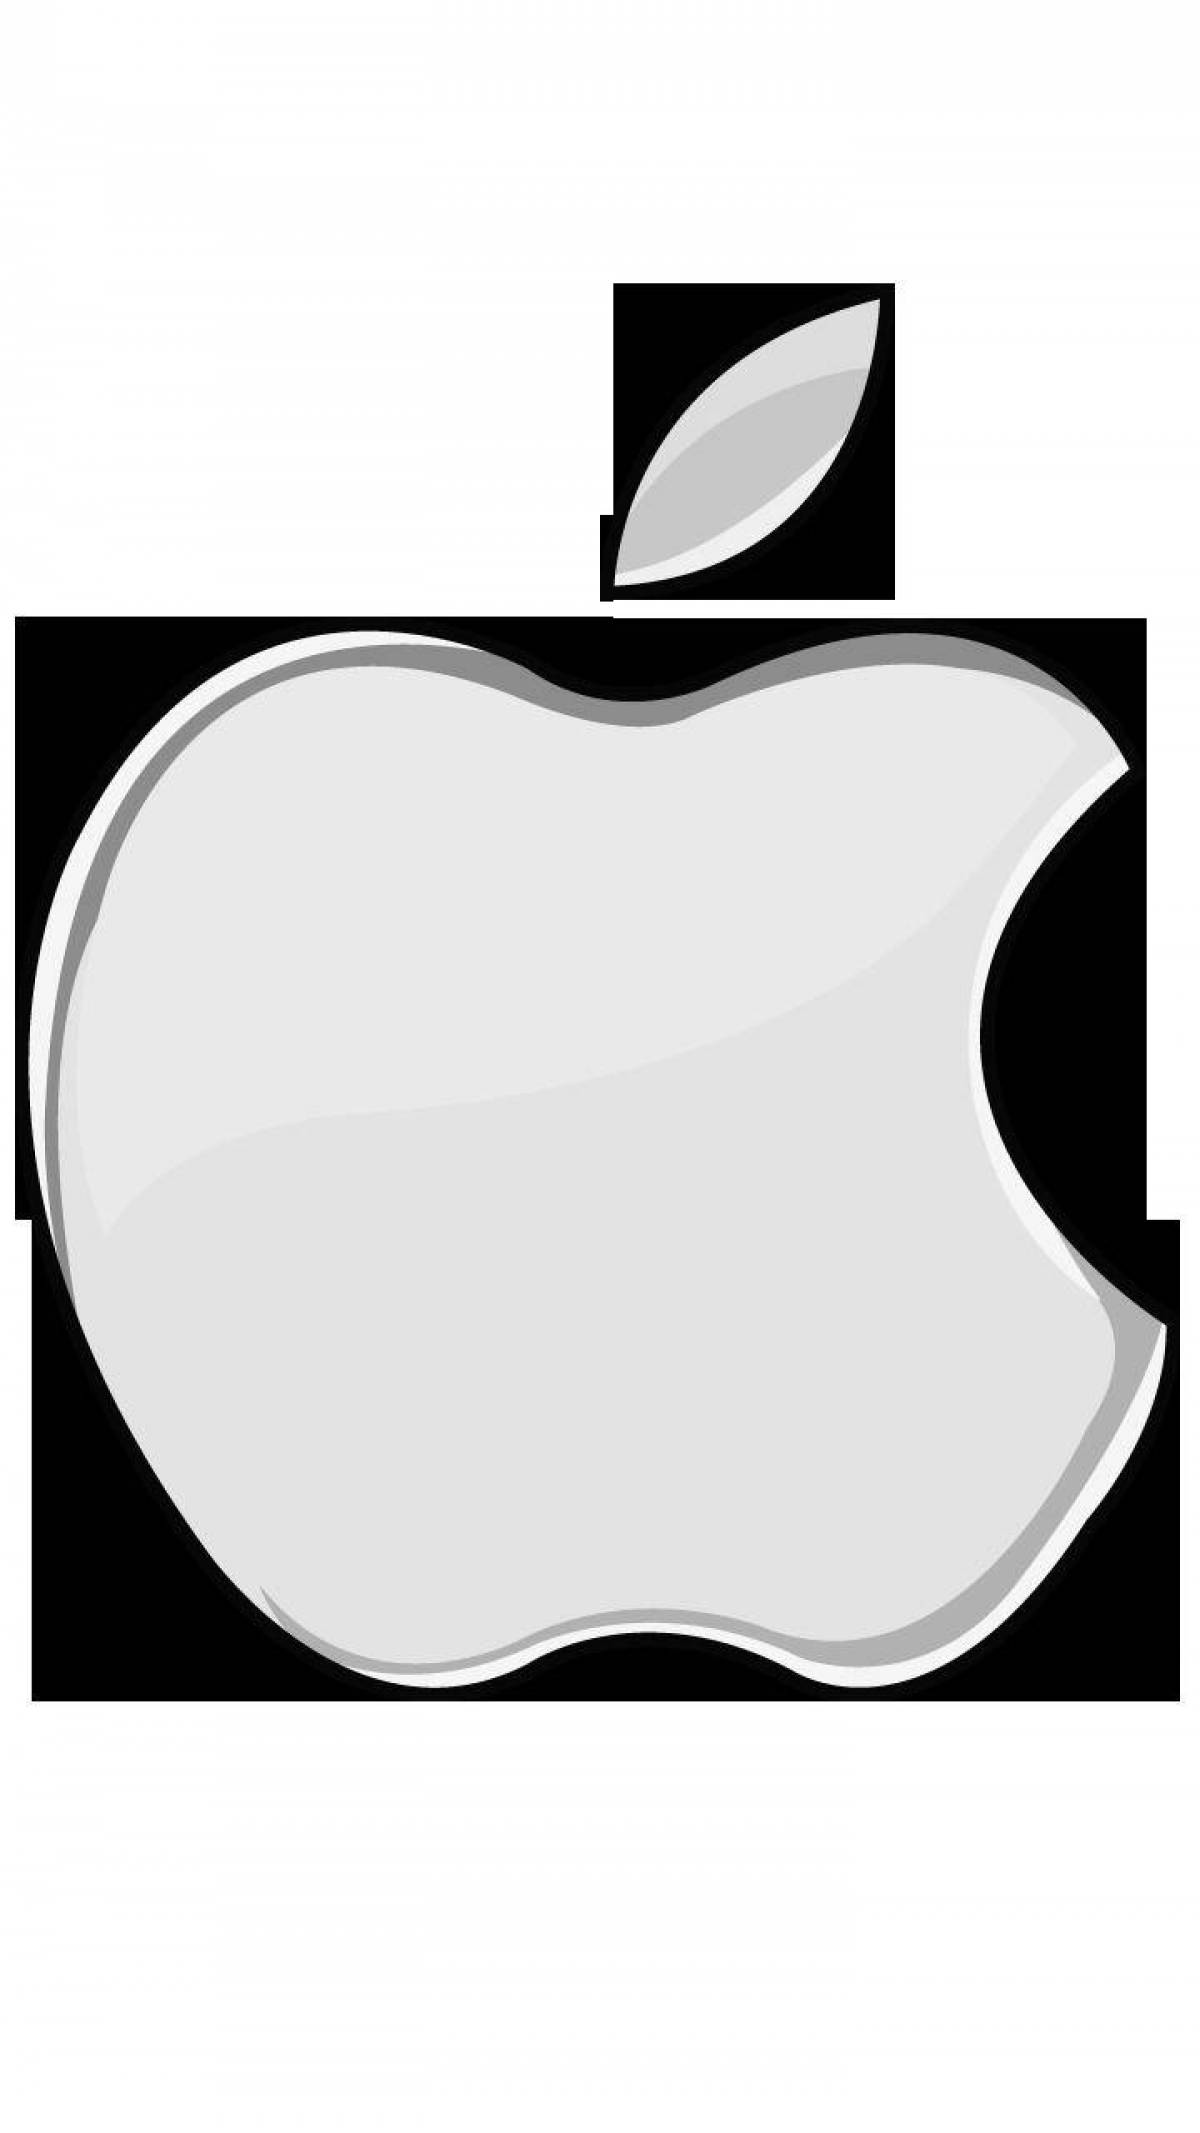 Live apple icon coloring page